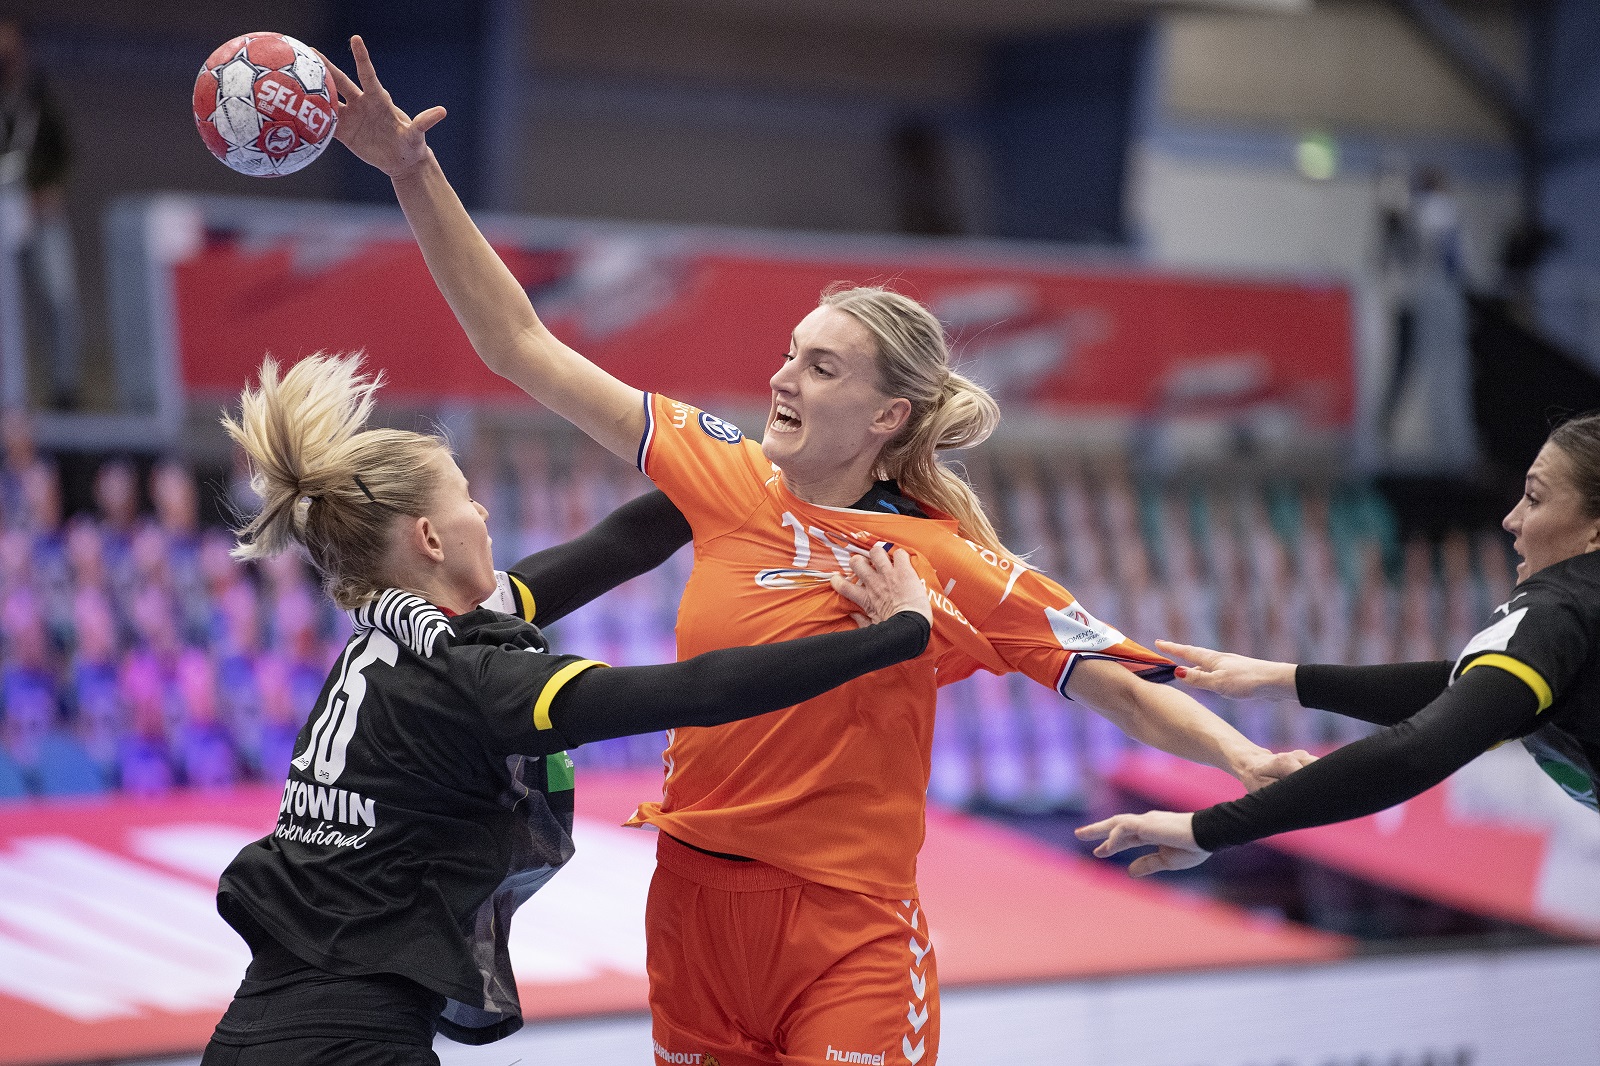 epa08884064 Kelly Dulfer (C) of the Netherlands in action with Kim Naidzinavicius (L) and Julia Behnke (R) of Germany during the EHF EURO 2020 European Women's Handball Main Round - Group II match between the Netherlands and Germany at Sydbank Arena in Kolding, Denmark, 14 December 2020.  EPA/BO AMSTRUP DENMARK OUT